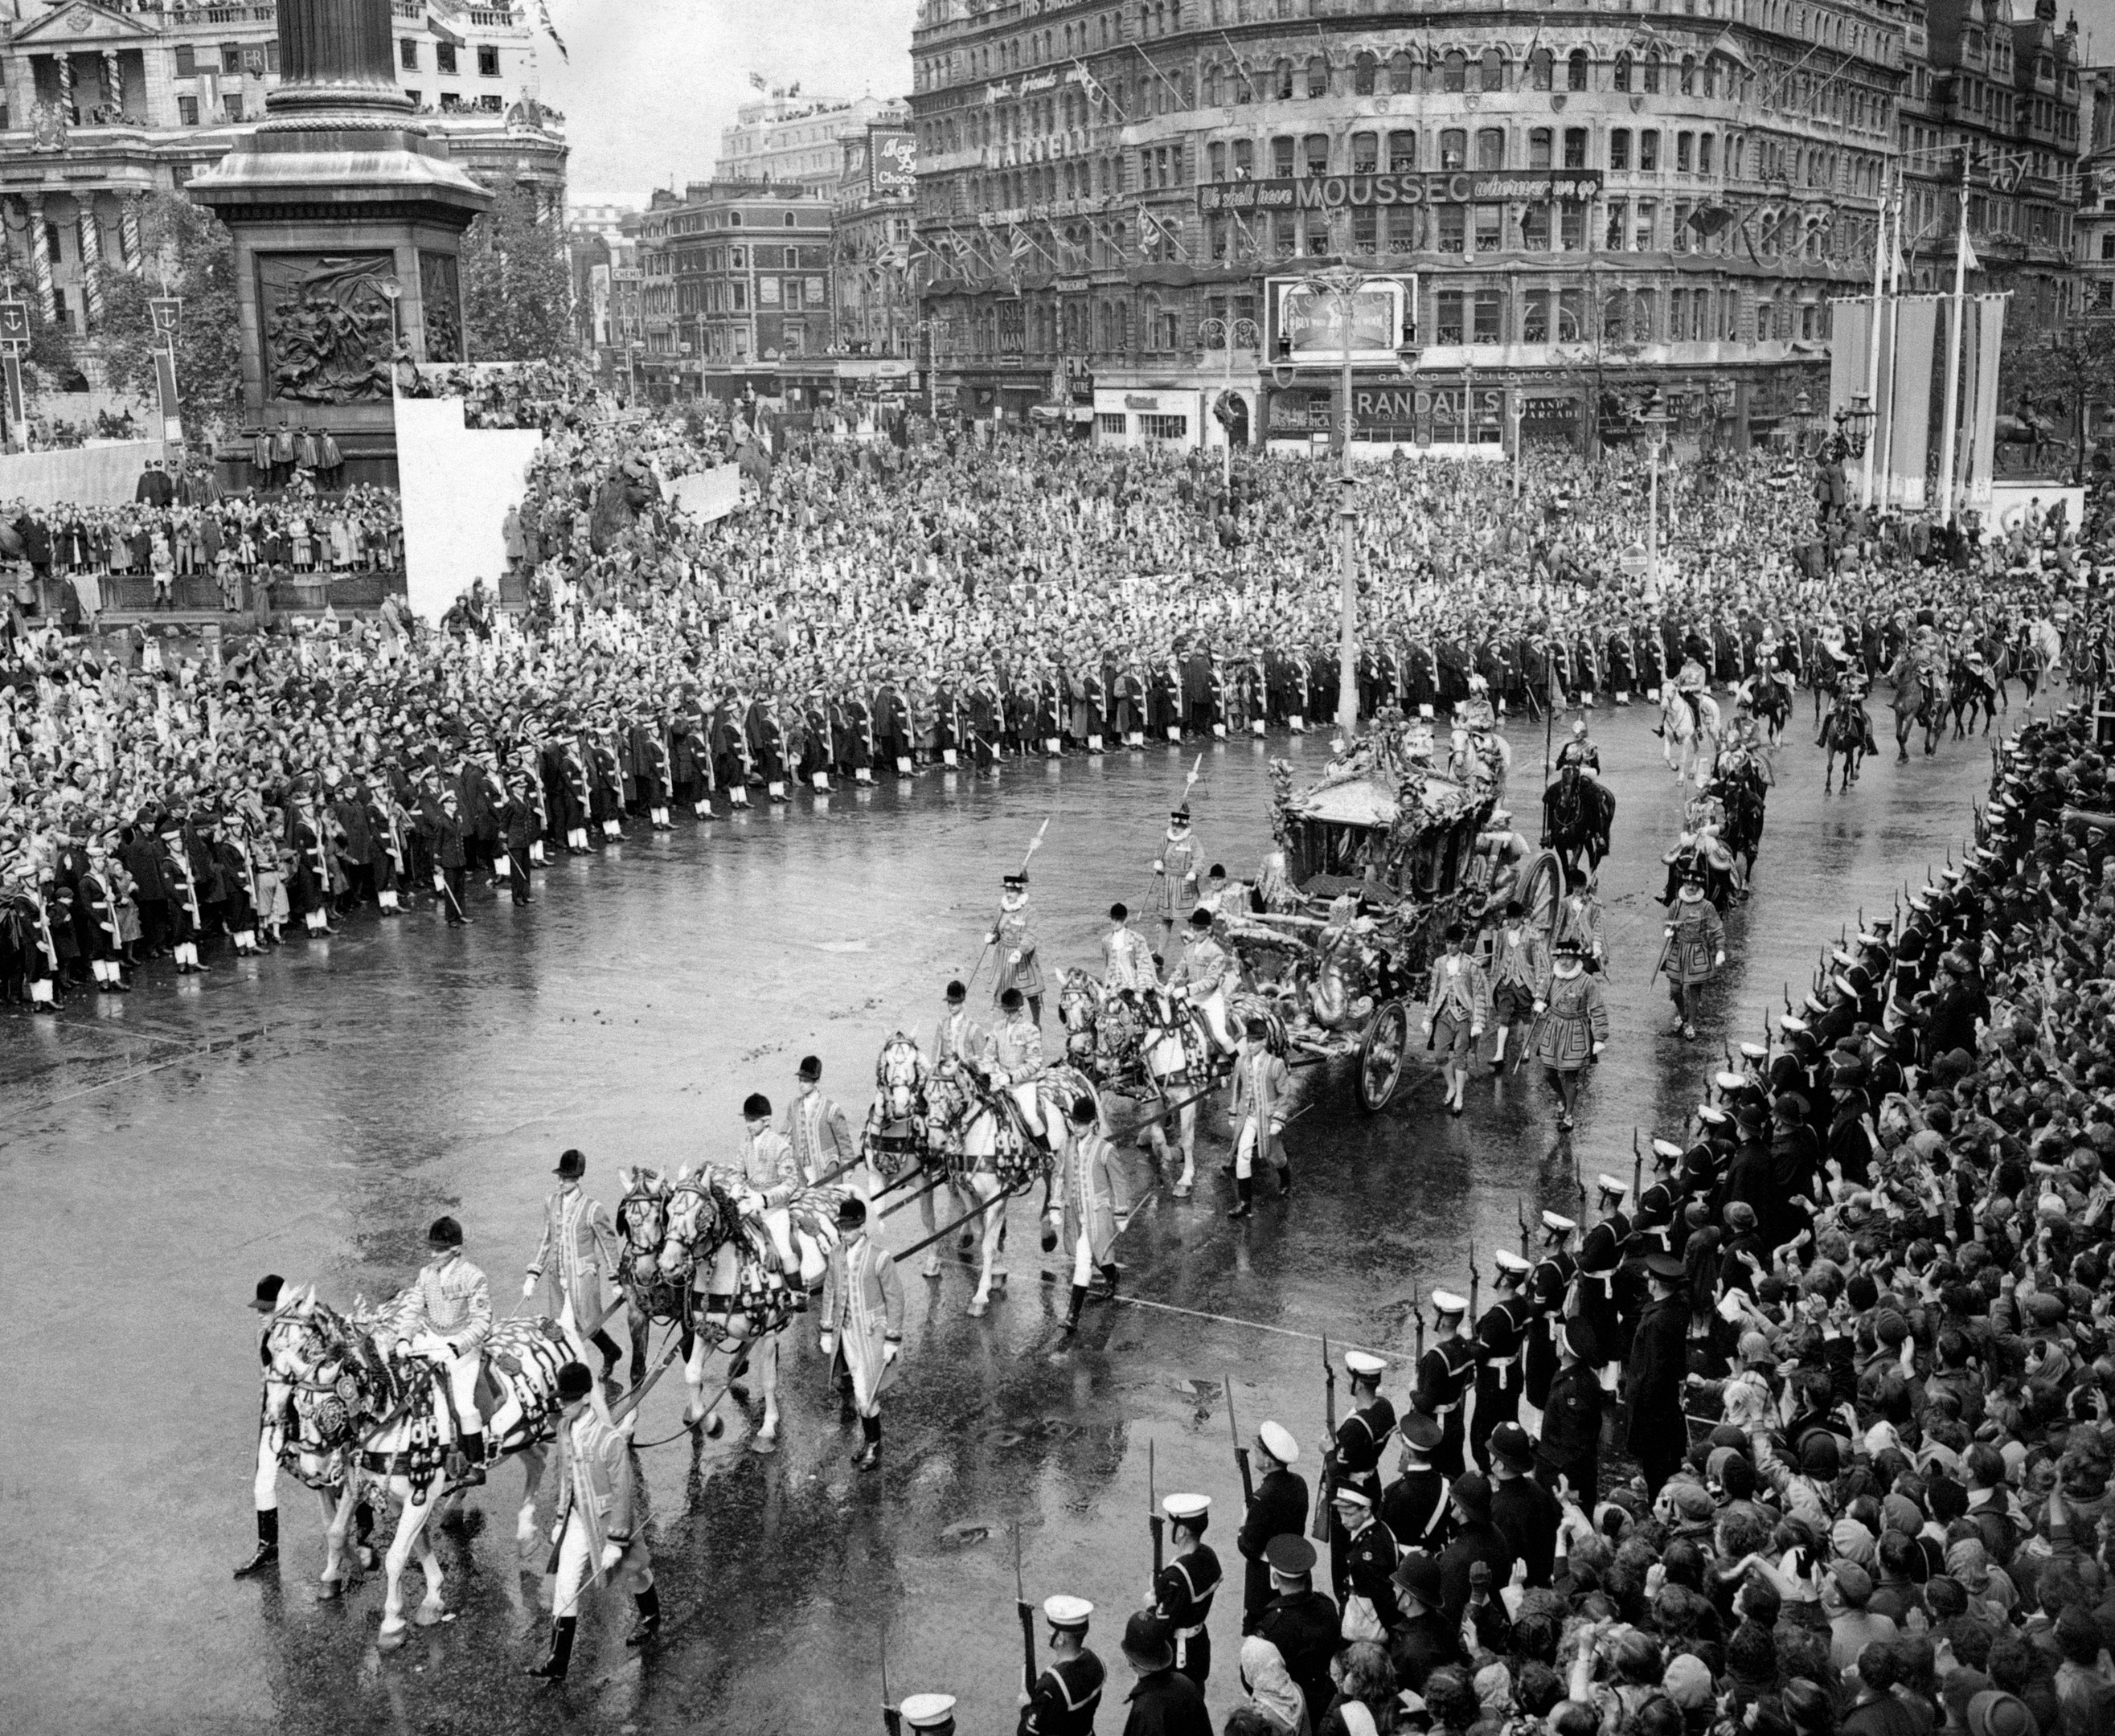 The golden State coach, bearing the Queen and the Duke of Edinburgh, passes through the cheering crowds which, despite the rain, packed Trafalgar Square to greet the sovereign on her from Westminster Abbey to Buckingham Palace after her Coronation.